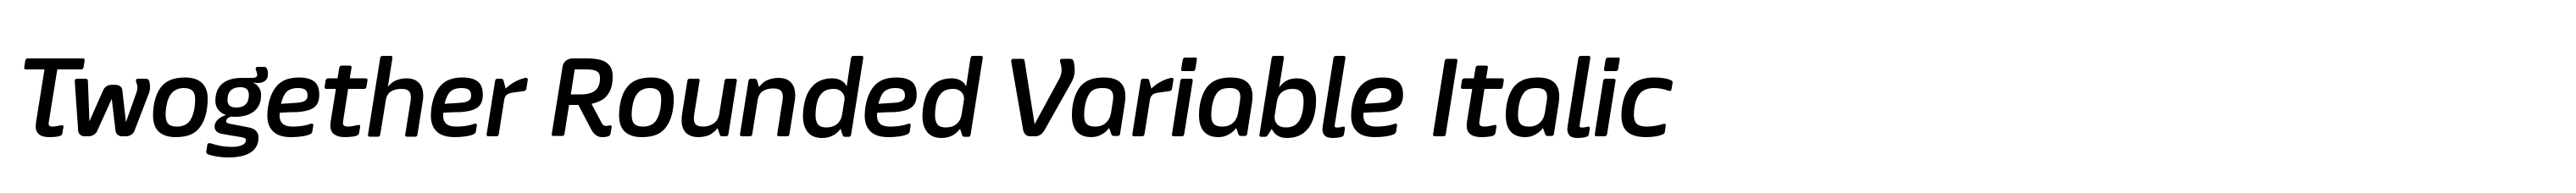 Twogether Rounded Variable Italic